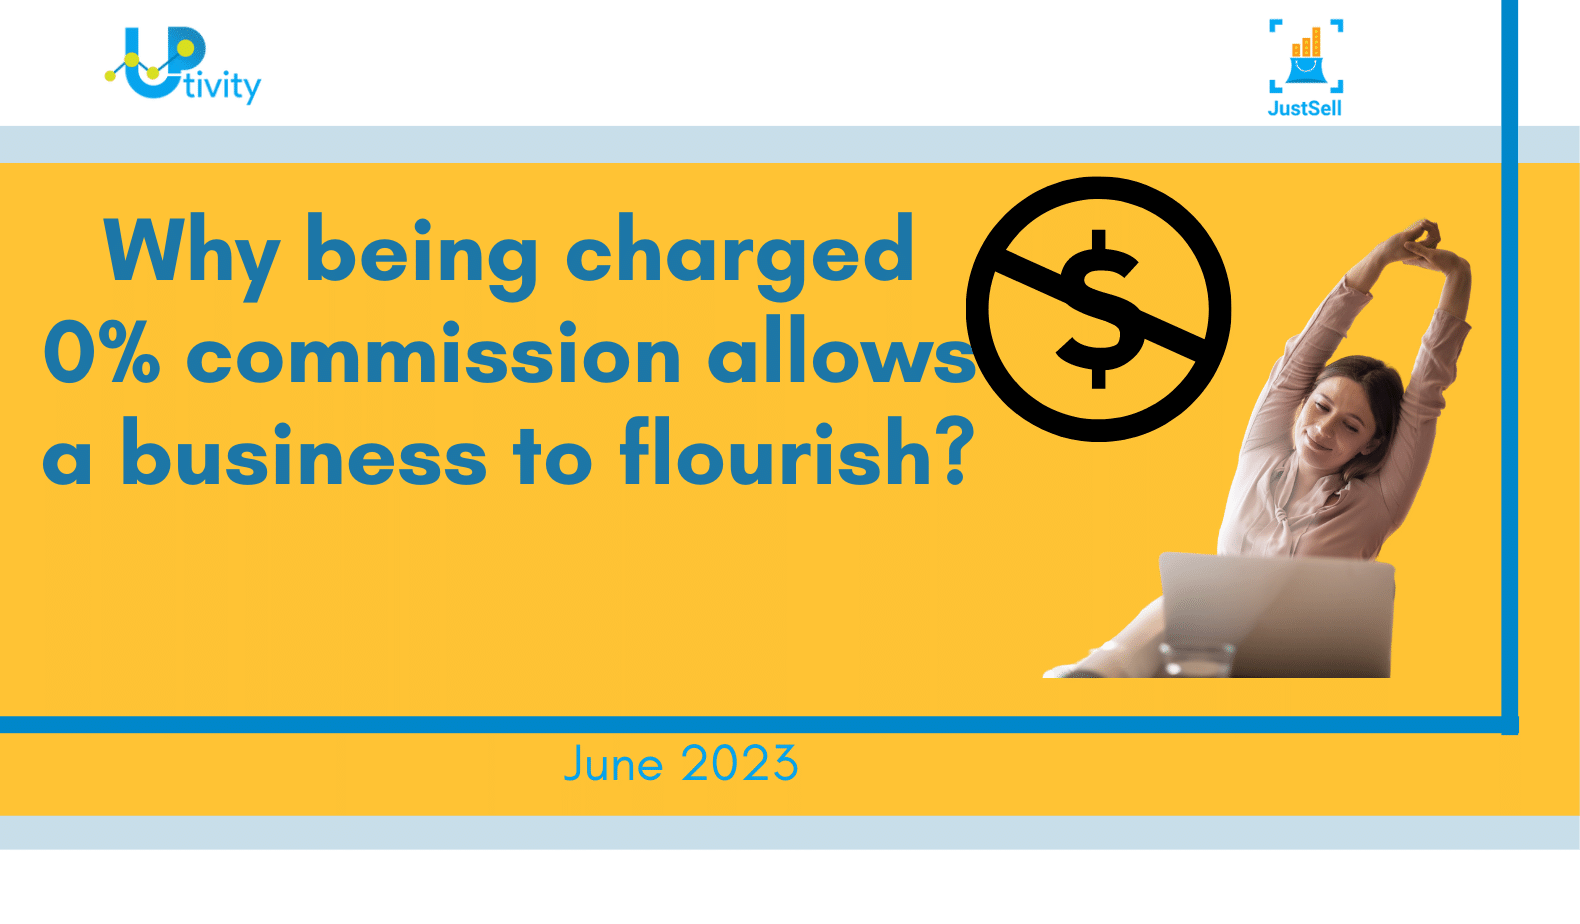 Not being charged commission allows you to relax